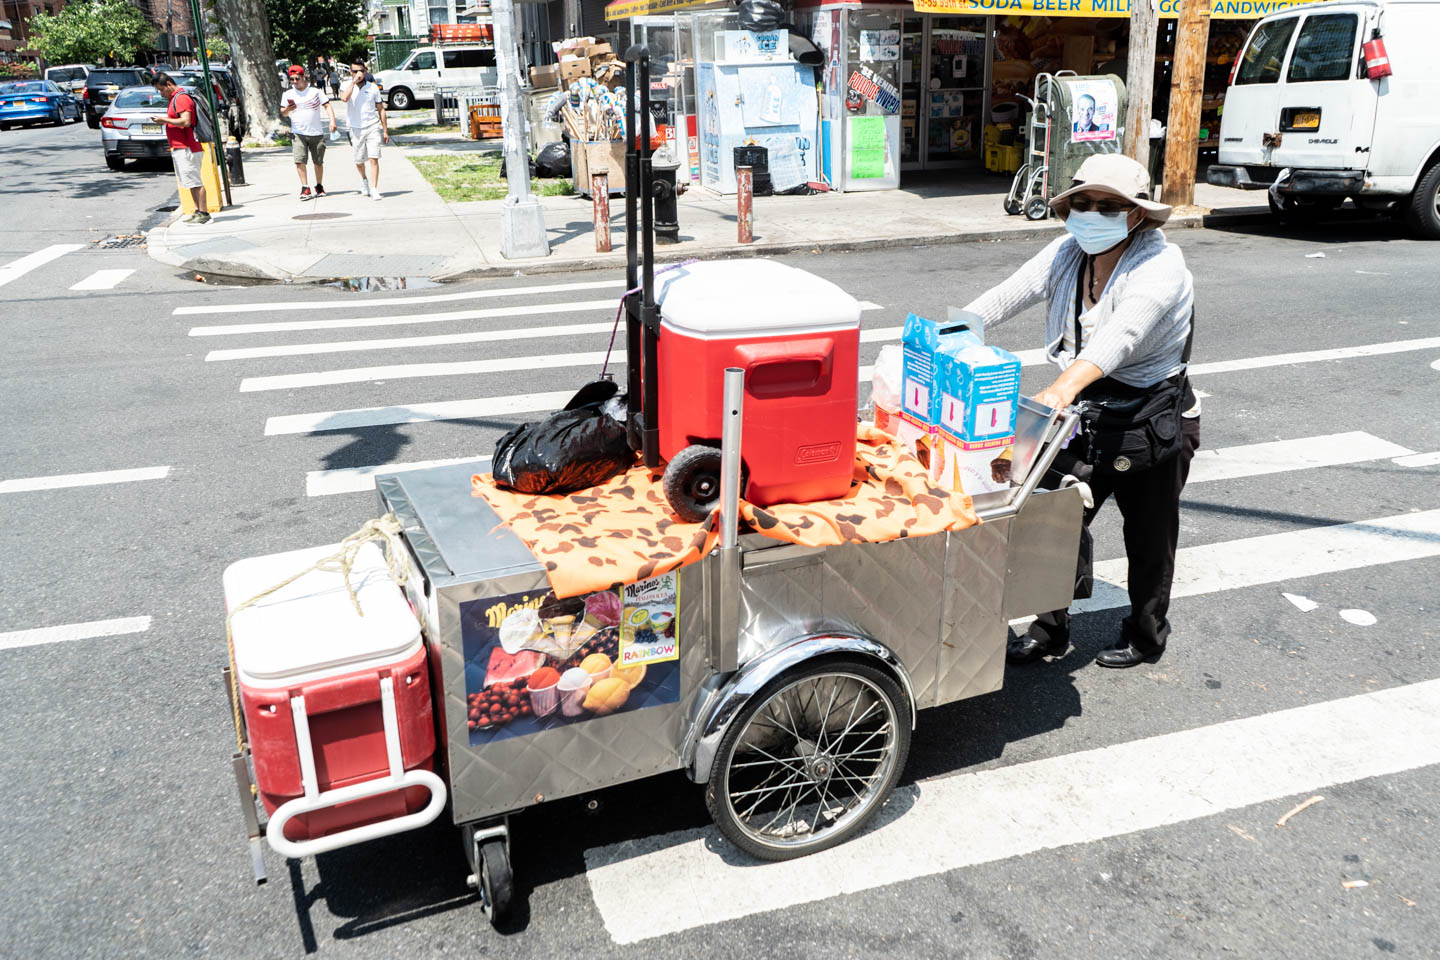 July 25, 2020: Maria, originally from Ecuador, on her way to her spot to sell Italian ices. 37th Avenue at 99th Street, Queens, New York. © Camilo José Vergara